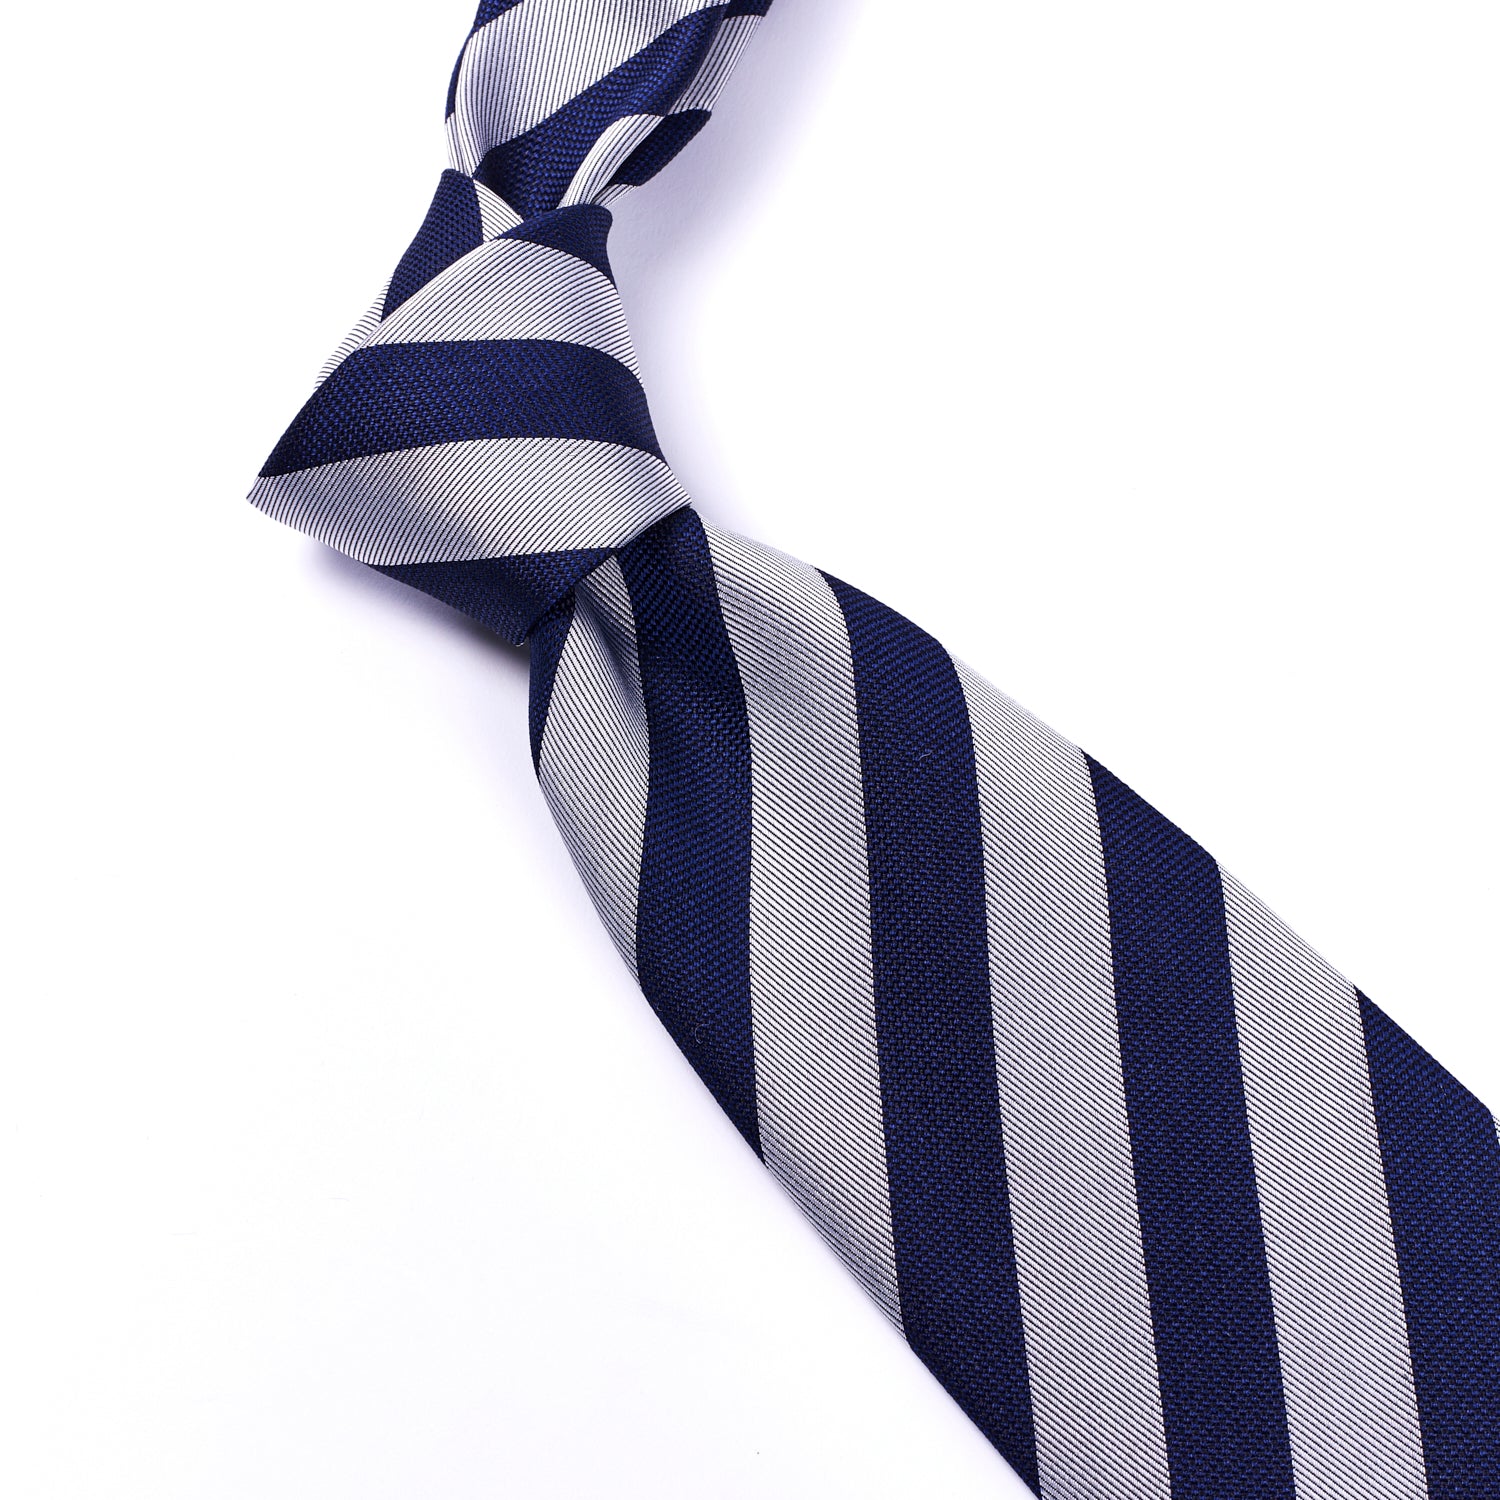 A Sovereign Grade Woven Navy and Silver Rep Tie, 150 cm on a white background from KirbyAllison.com ties.